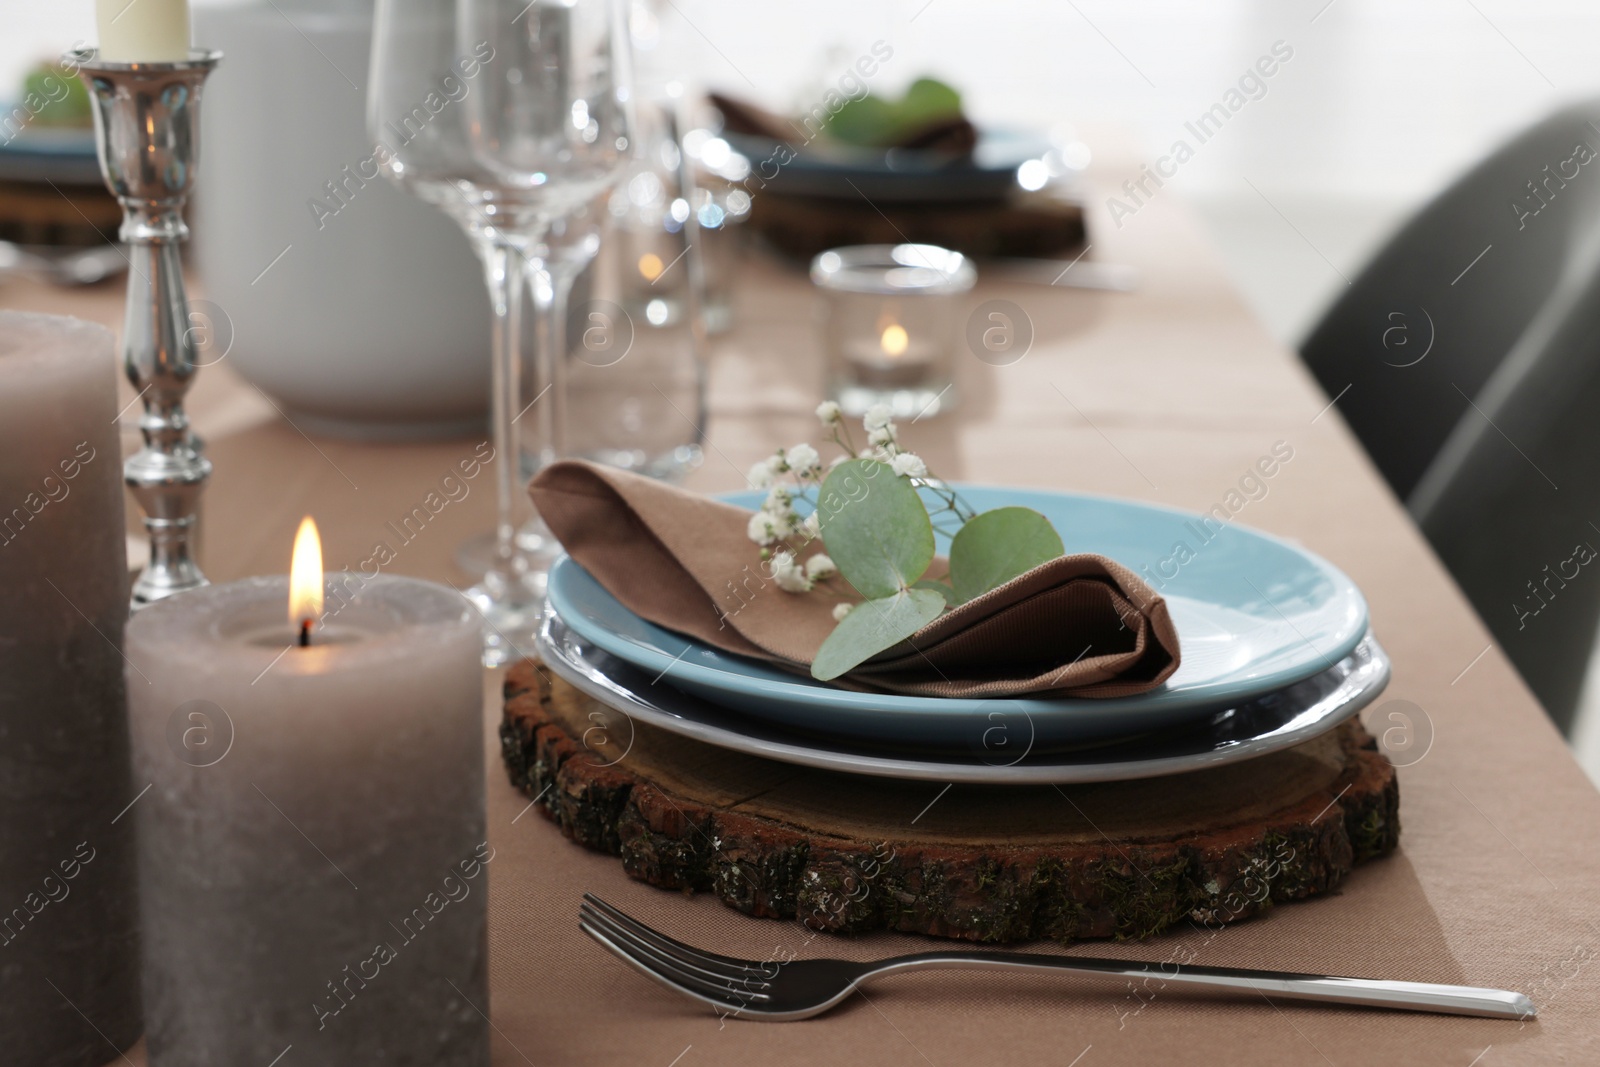 Photo of Festive table setting with beautiful tableware and decor